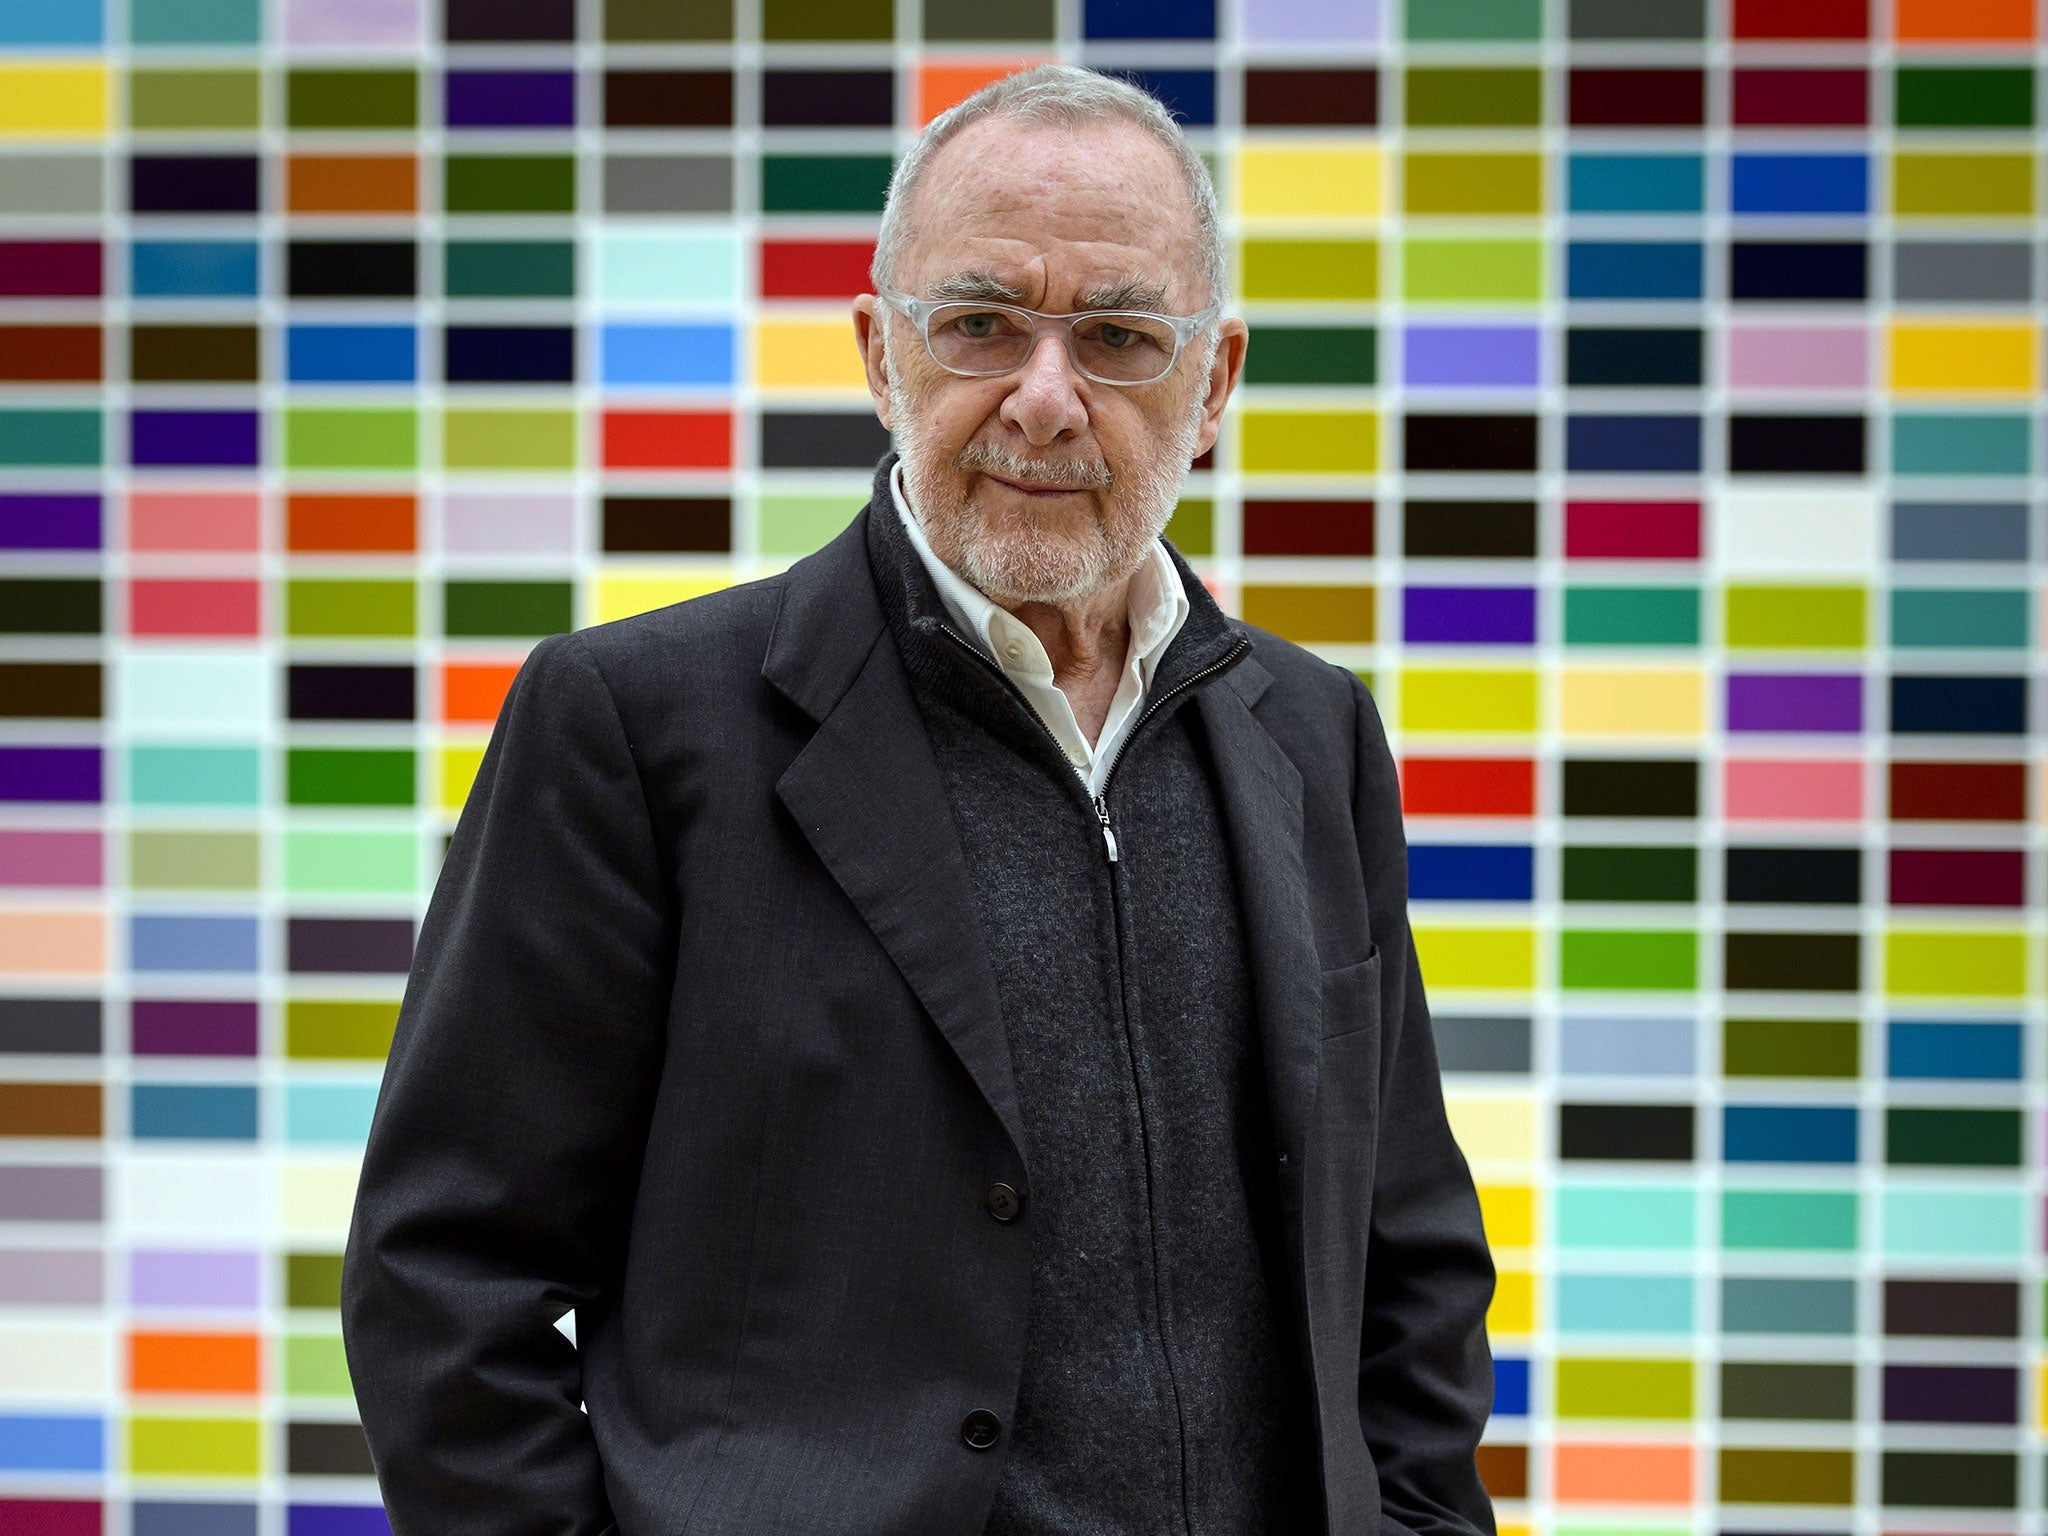 German painter Gerhard Richter said: ‘No one has the right to tell me what to do with my work’